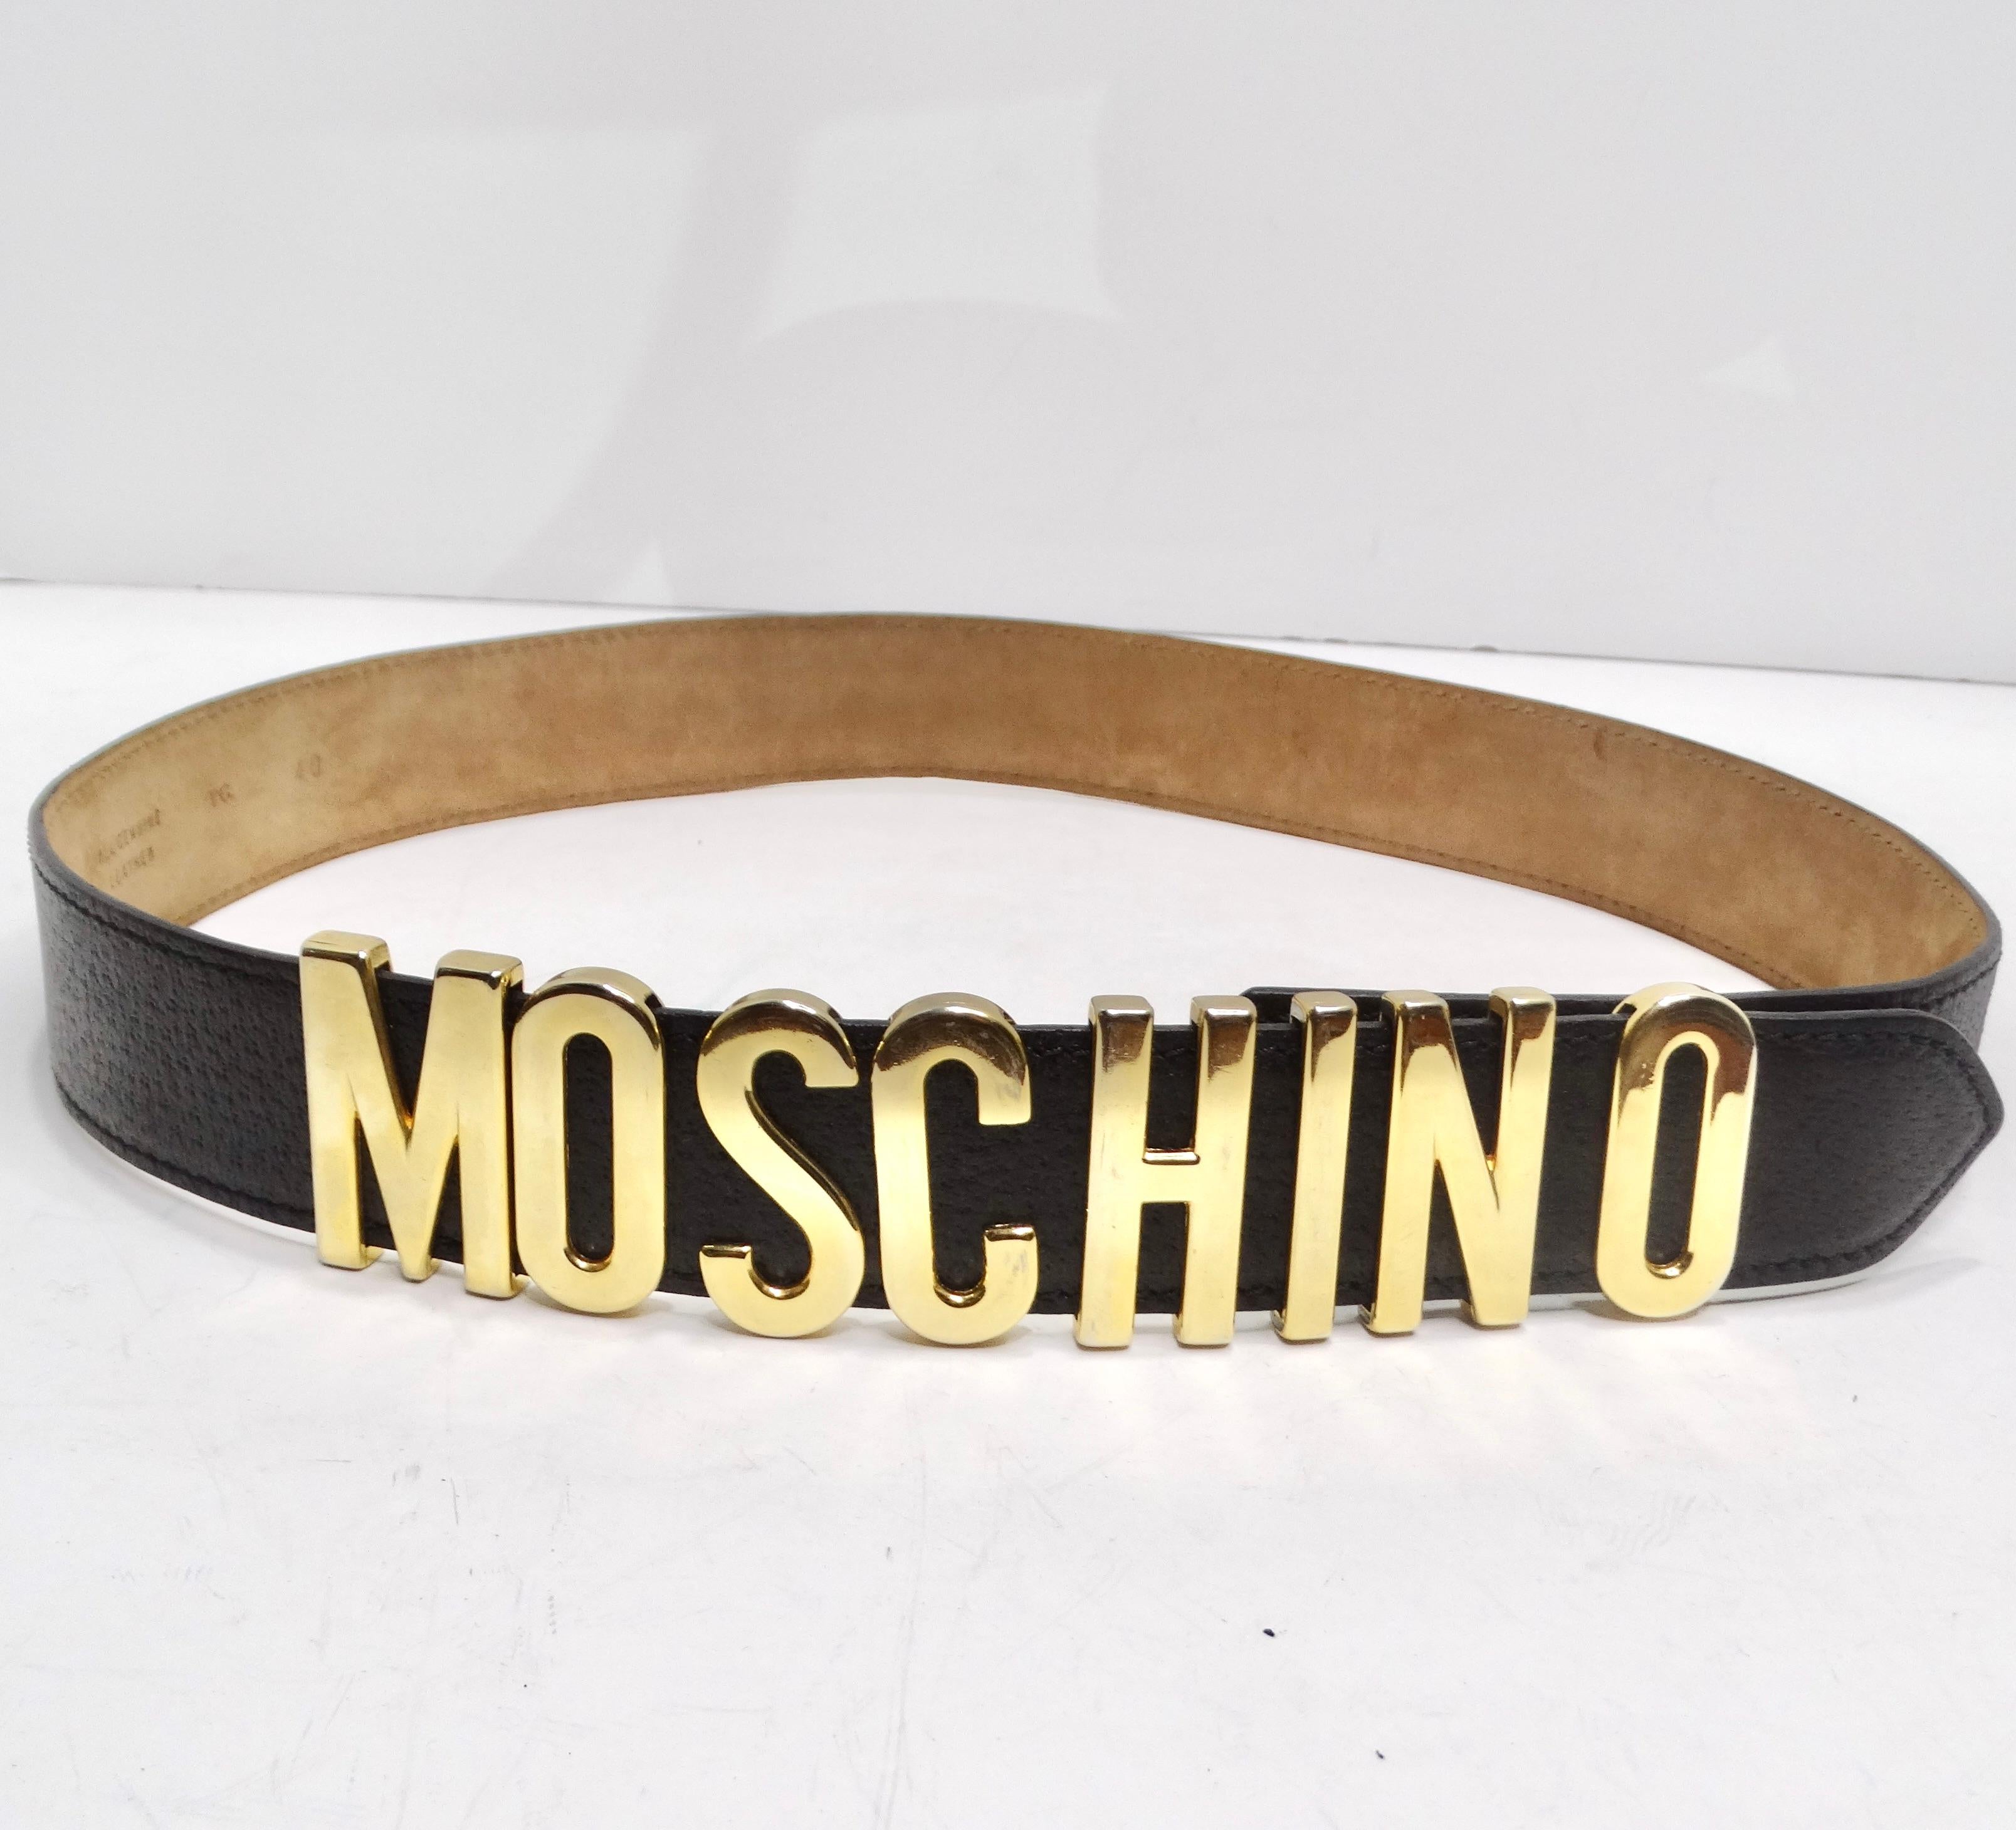 Moschino 1990s Gold Tone Logo Black Leather Belt In Good Condition For Sale In Scottsdale, AZ